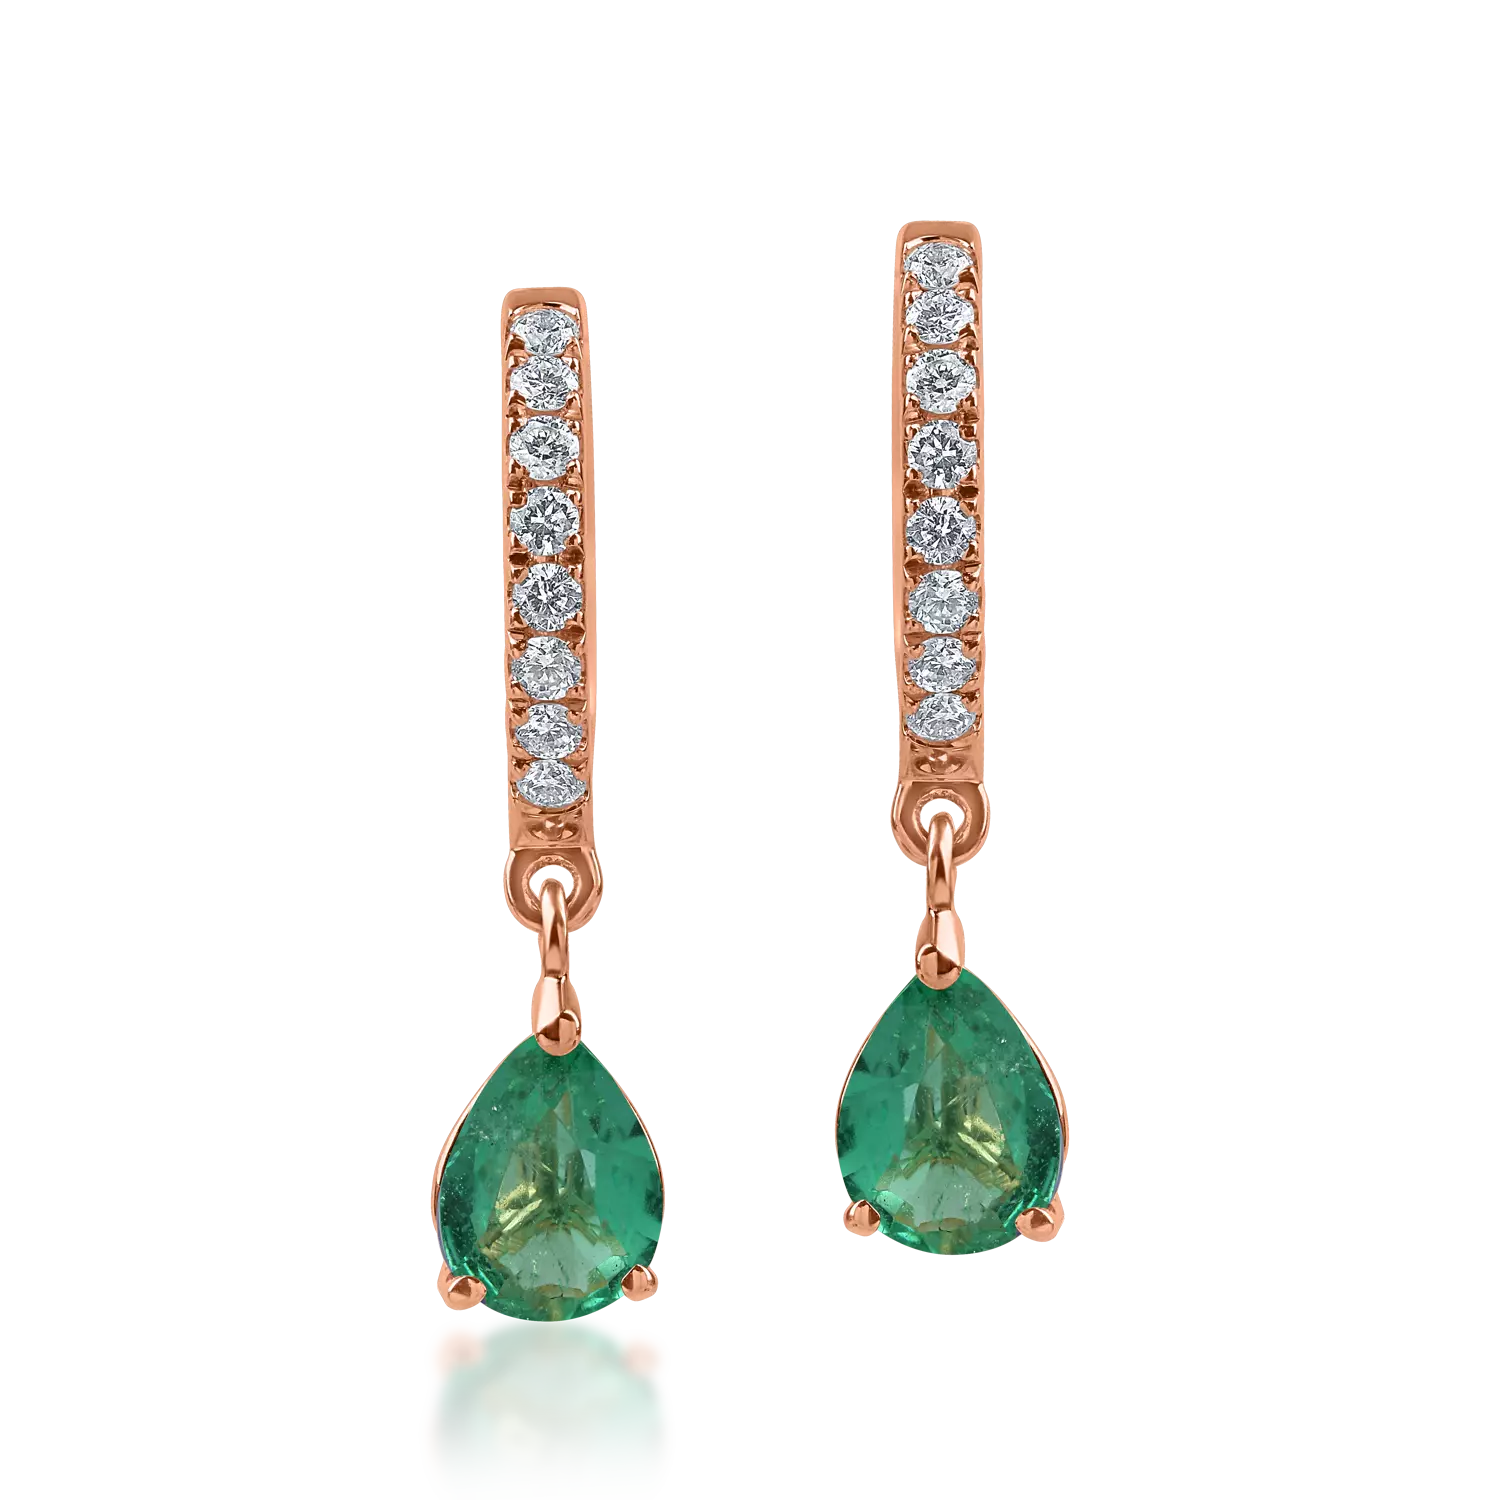 Rose gold hoop earrings with 0.4ct emeralds and 0.1ct diamonds